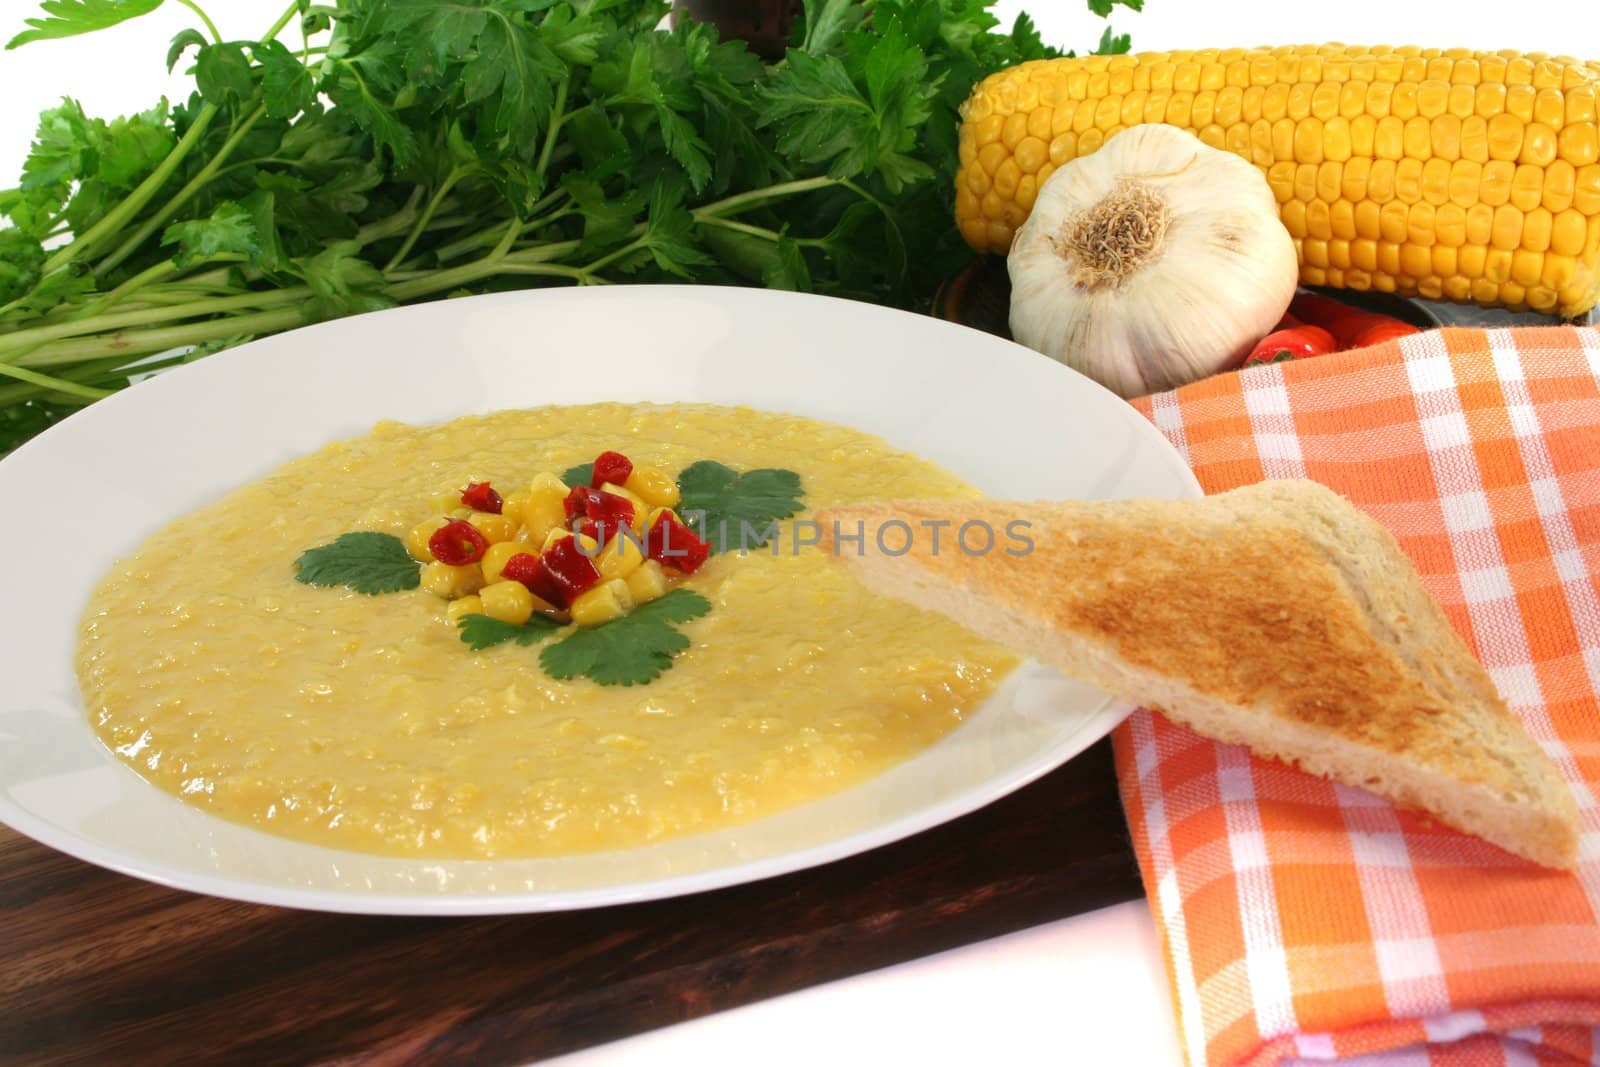 Corn soup by discovery